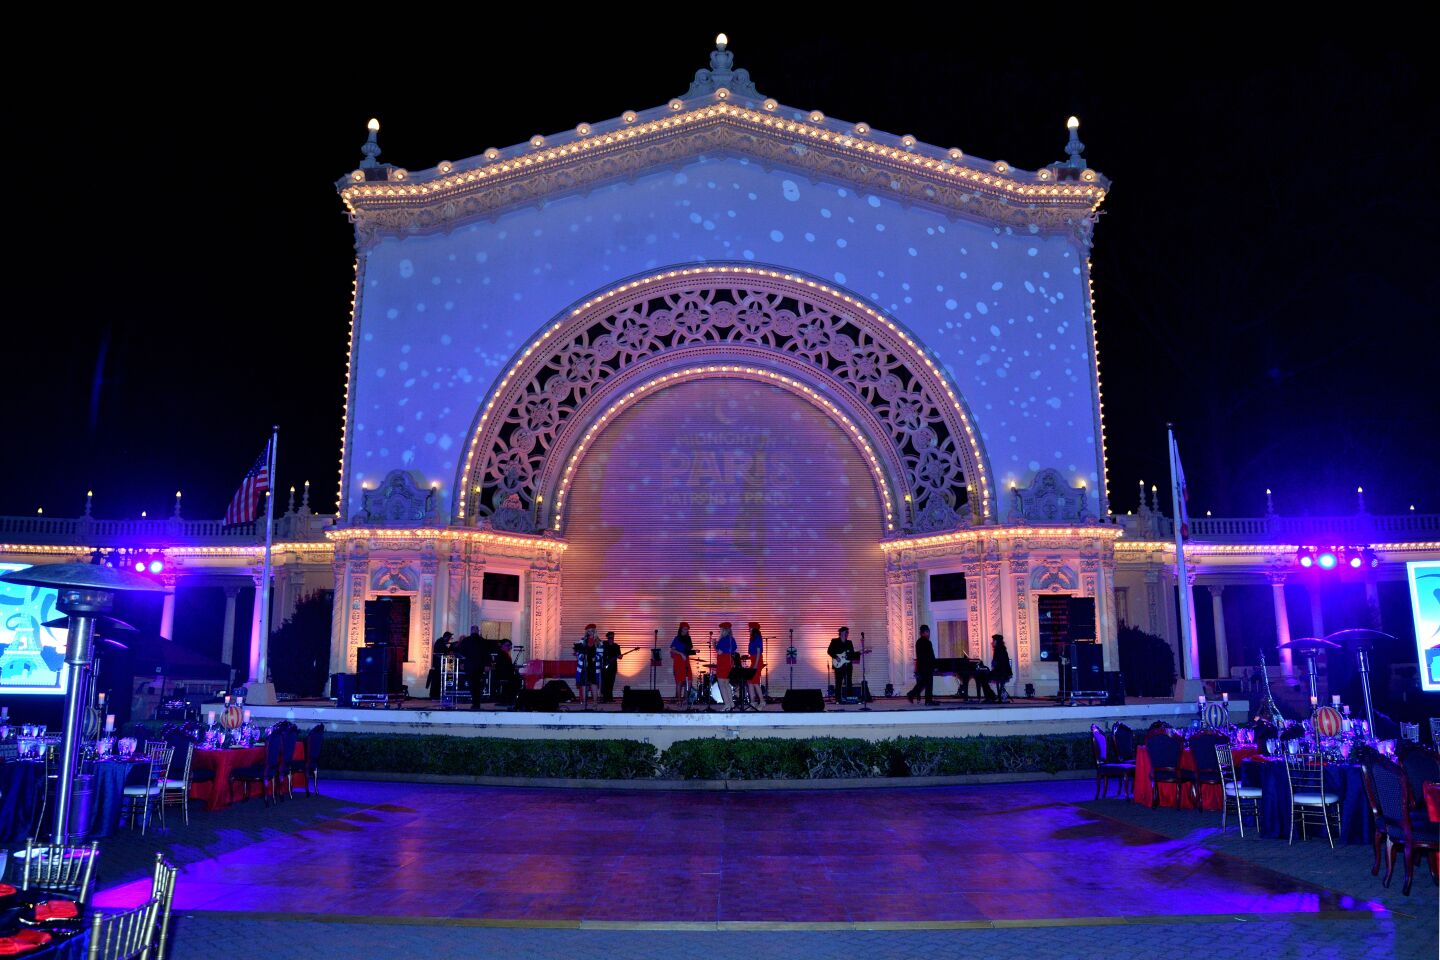 The stage is set for Patrons of the Prado's 2021 Masterpiece Gala, "Midnight in Paris," on Oct. 9 at the Spreckels Organ Pavilion in Balboa Park.